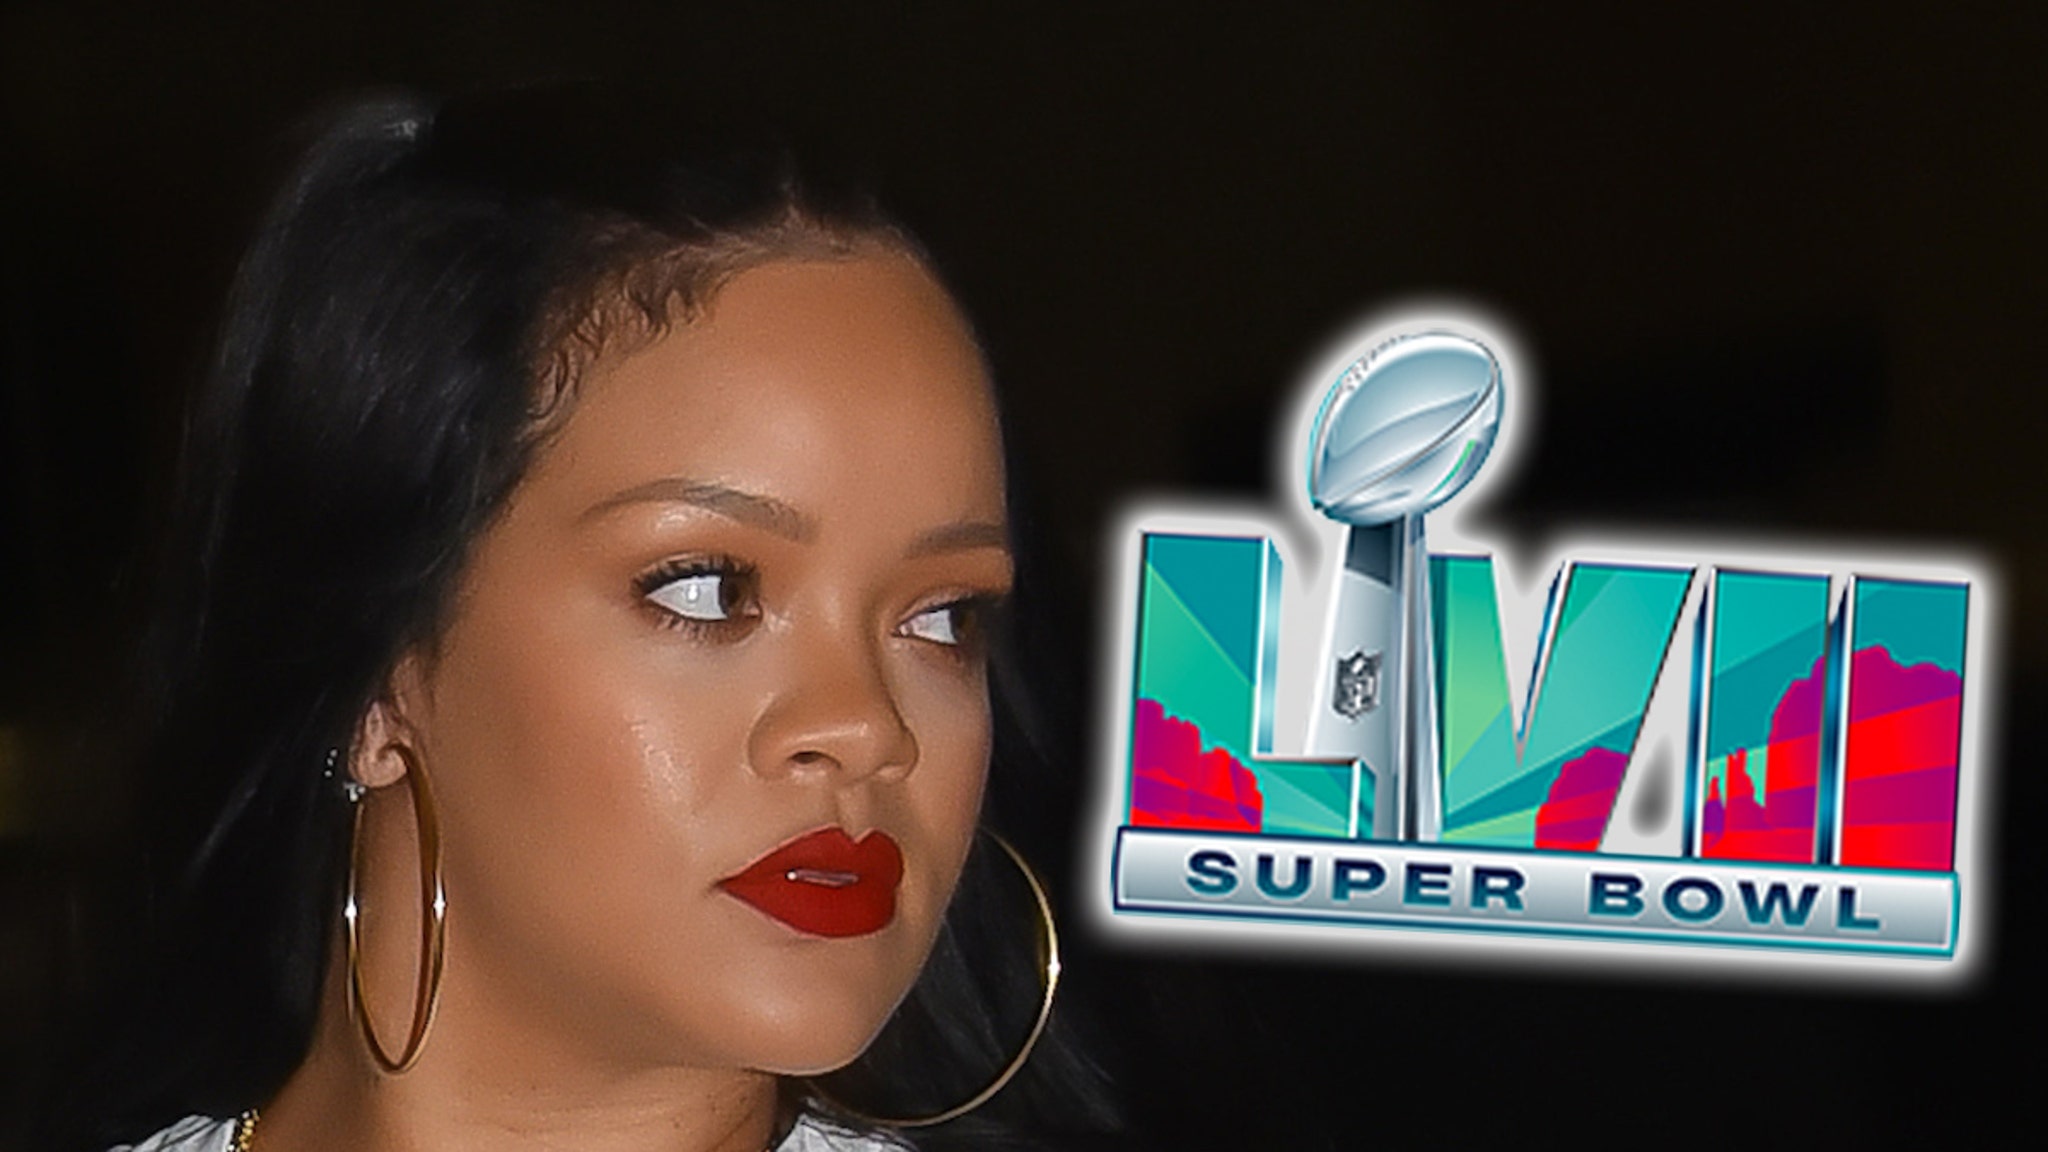 rihanna-has-not-yet-picked-super-bowl-guest-performer-could-be-a-solo-show